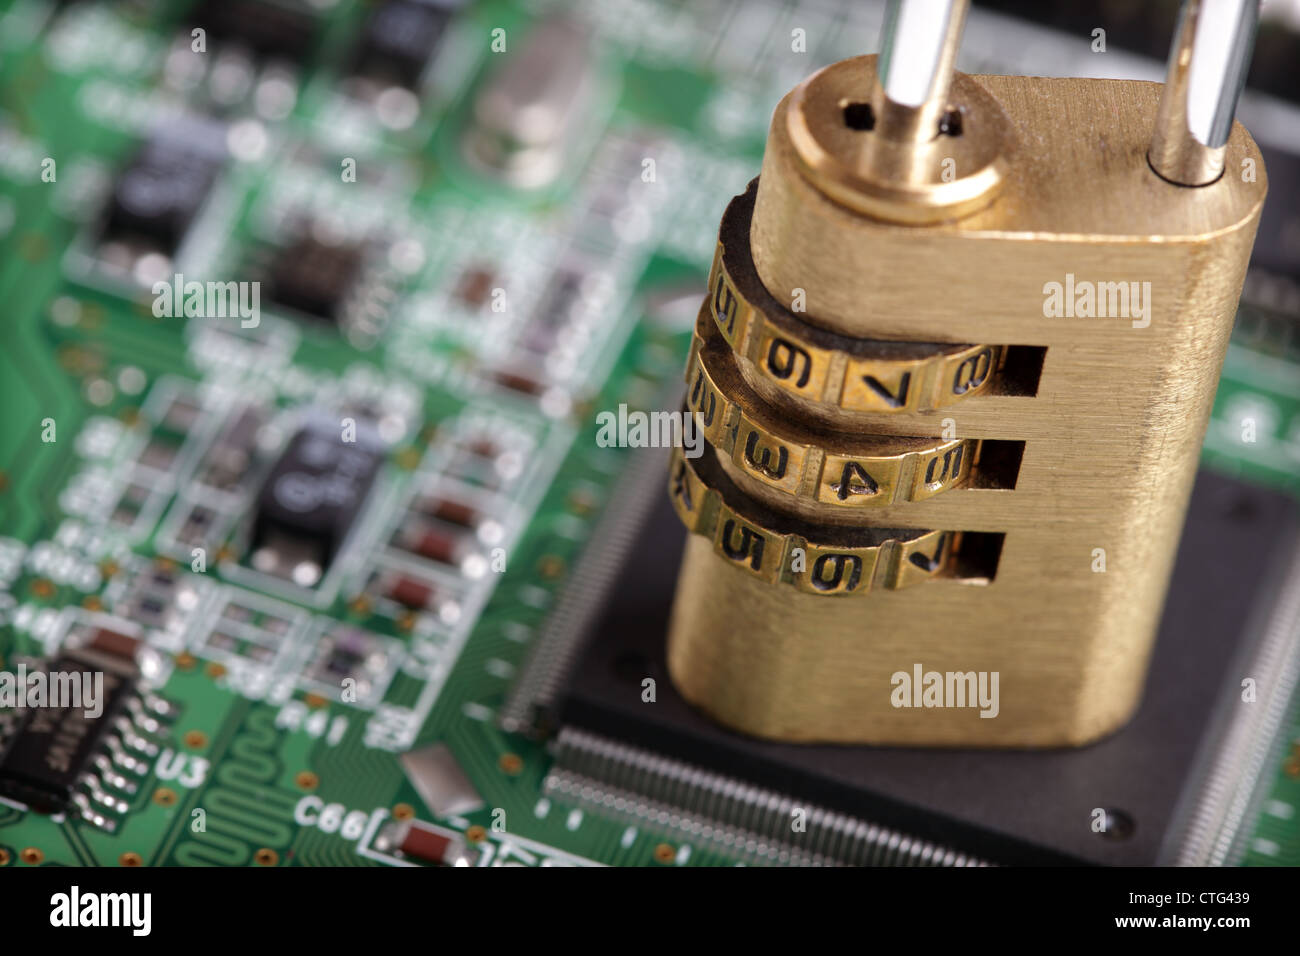 Internet and computer security Stock Photo